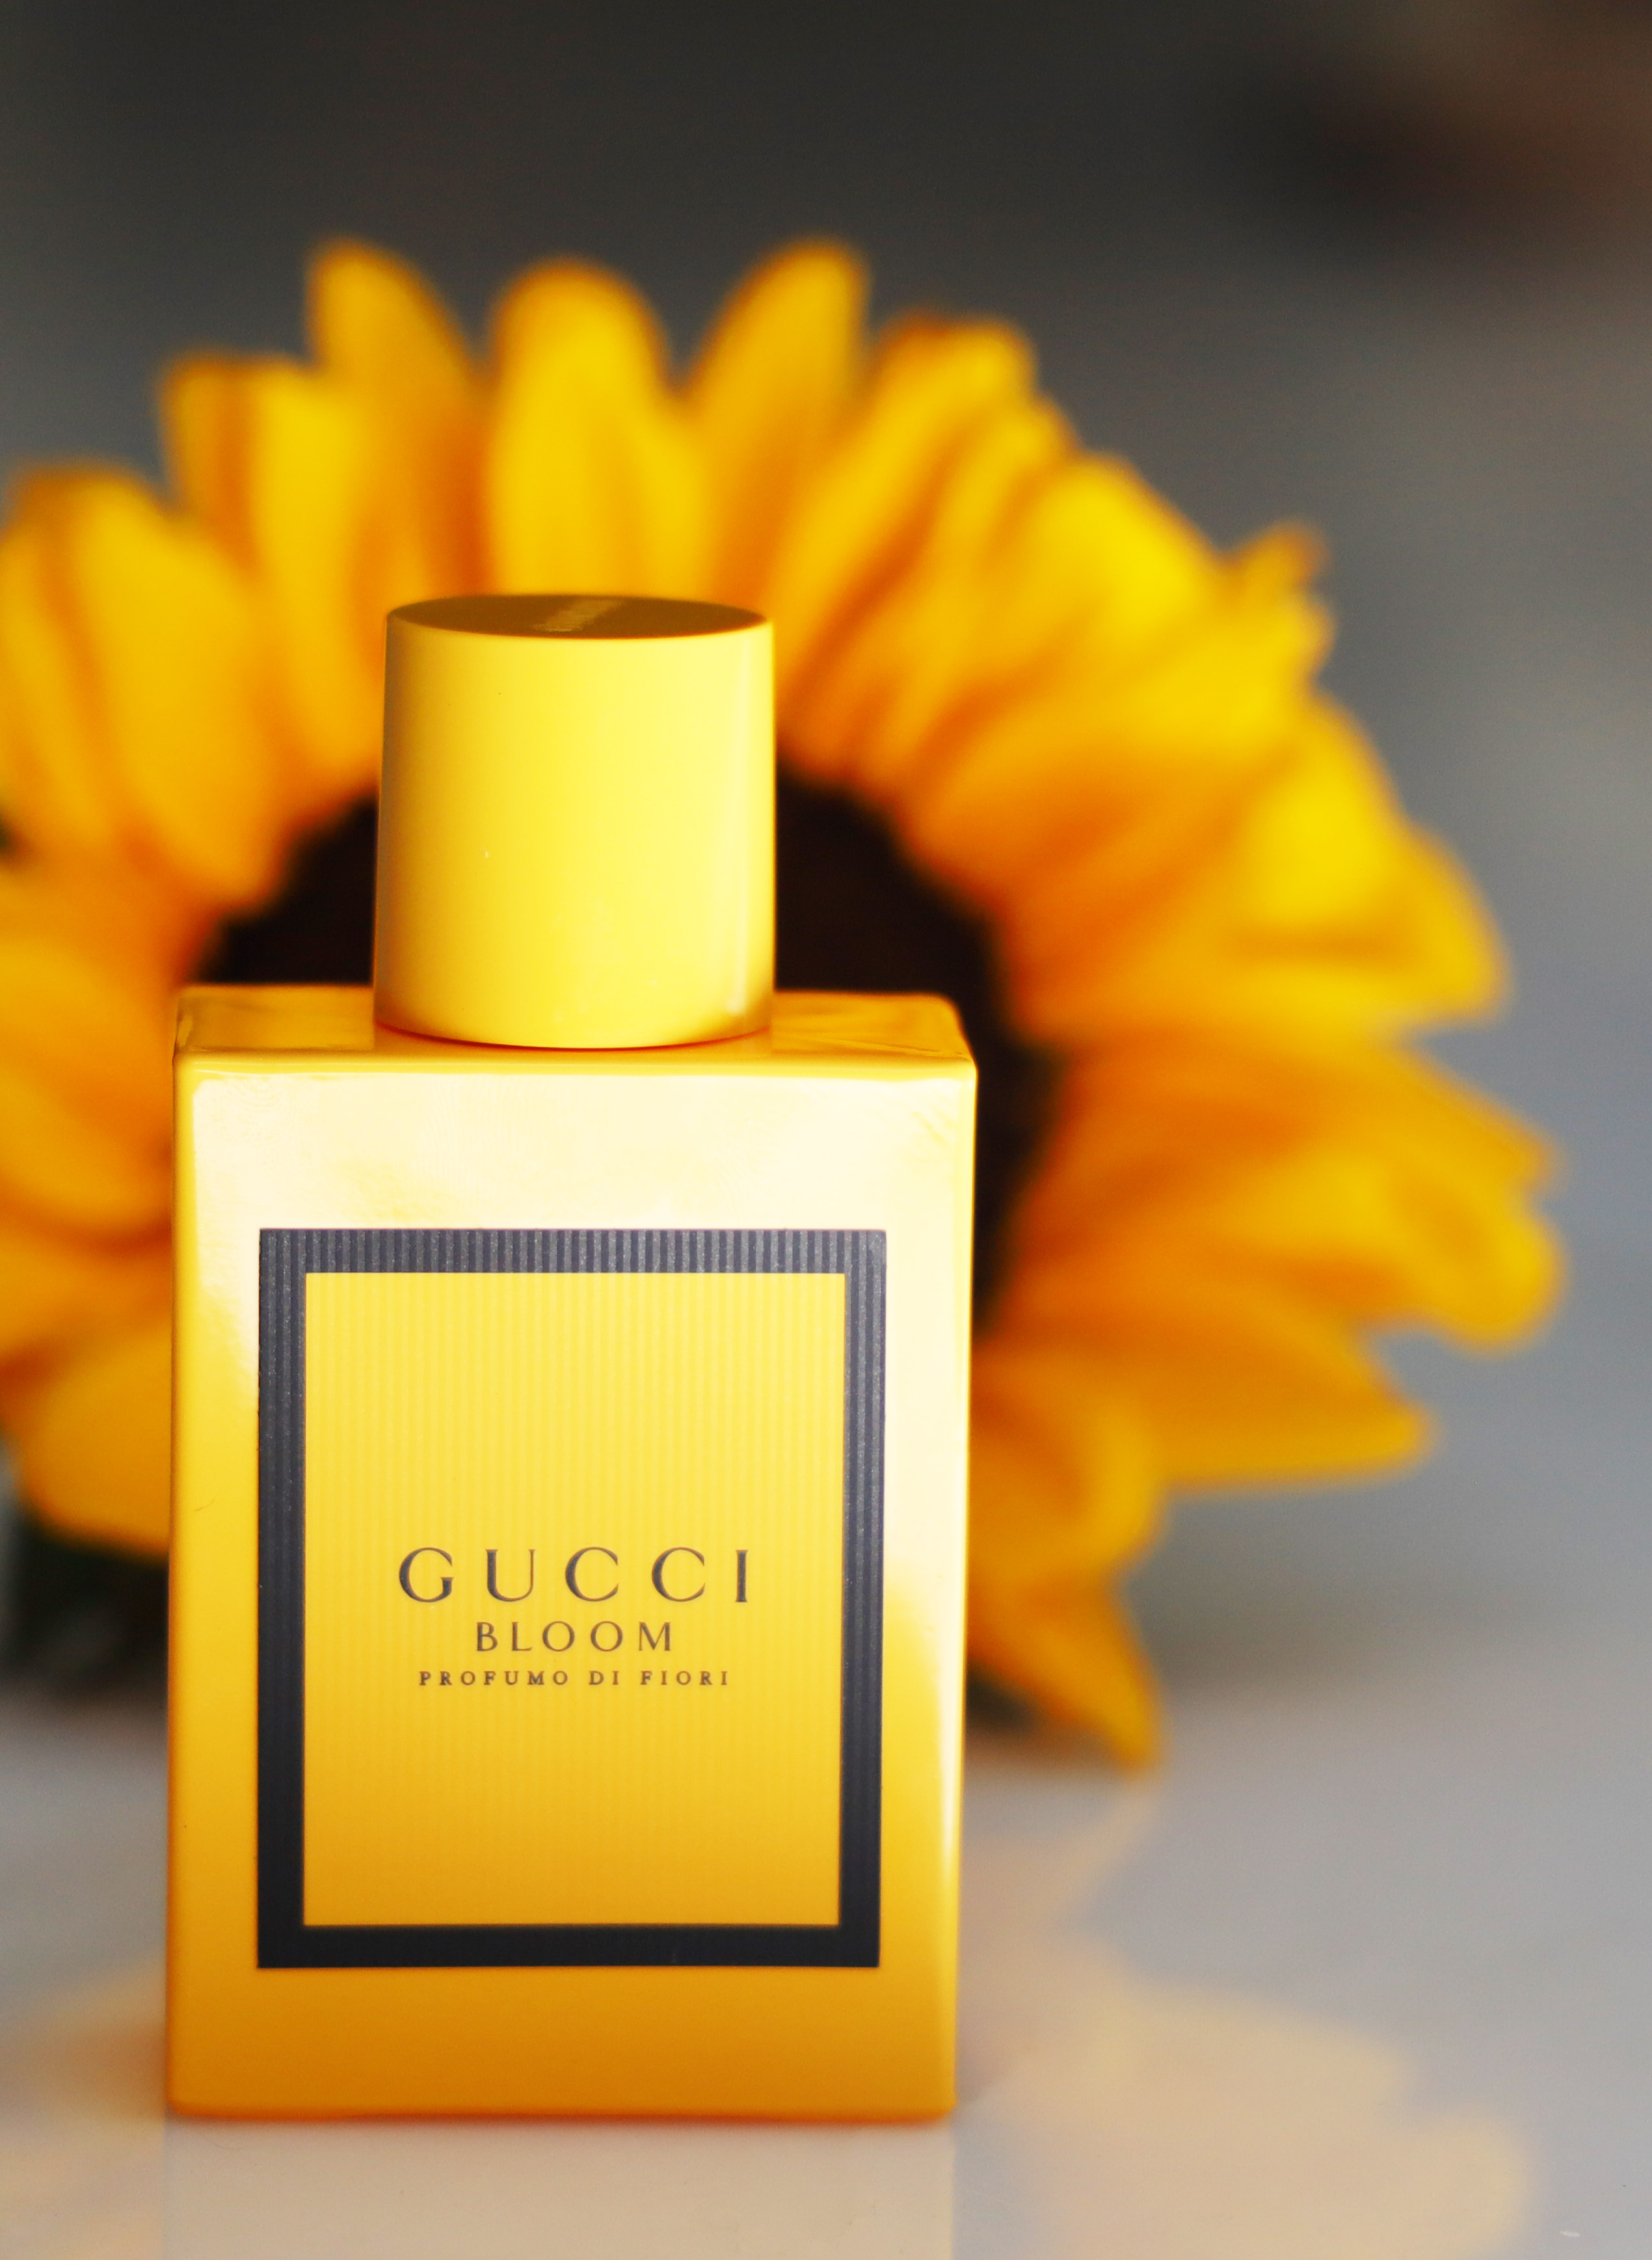 The New Bright Yellow Gucci Bloom 